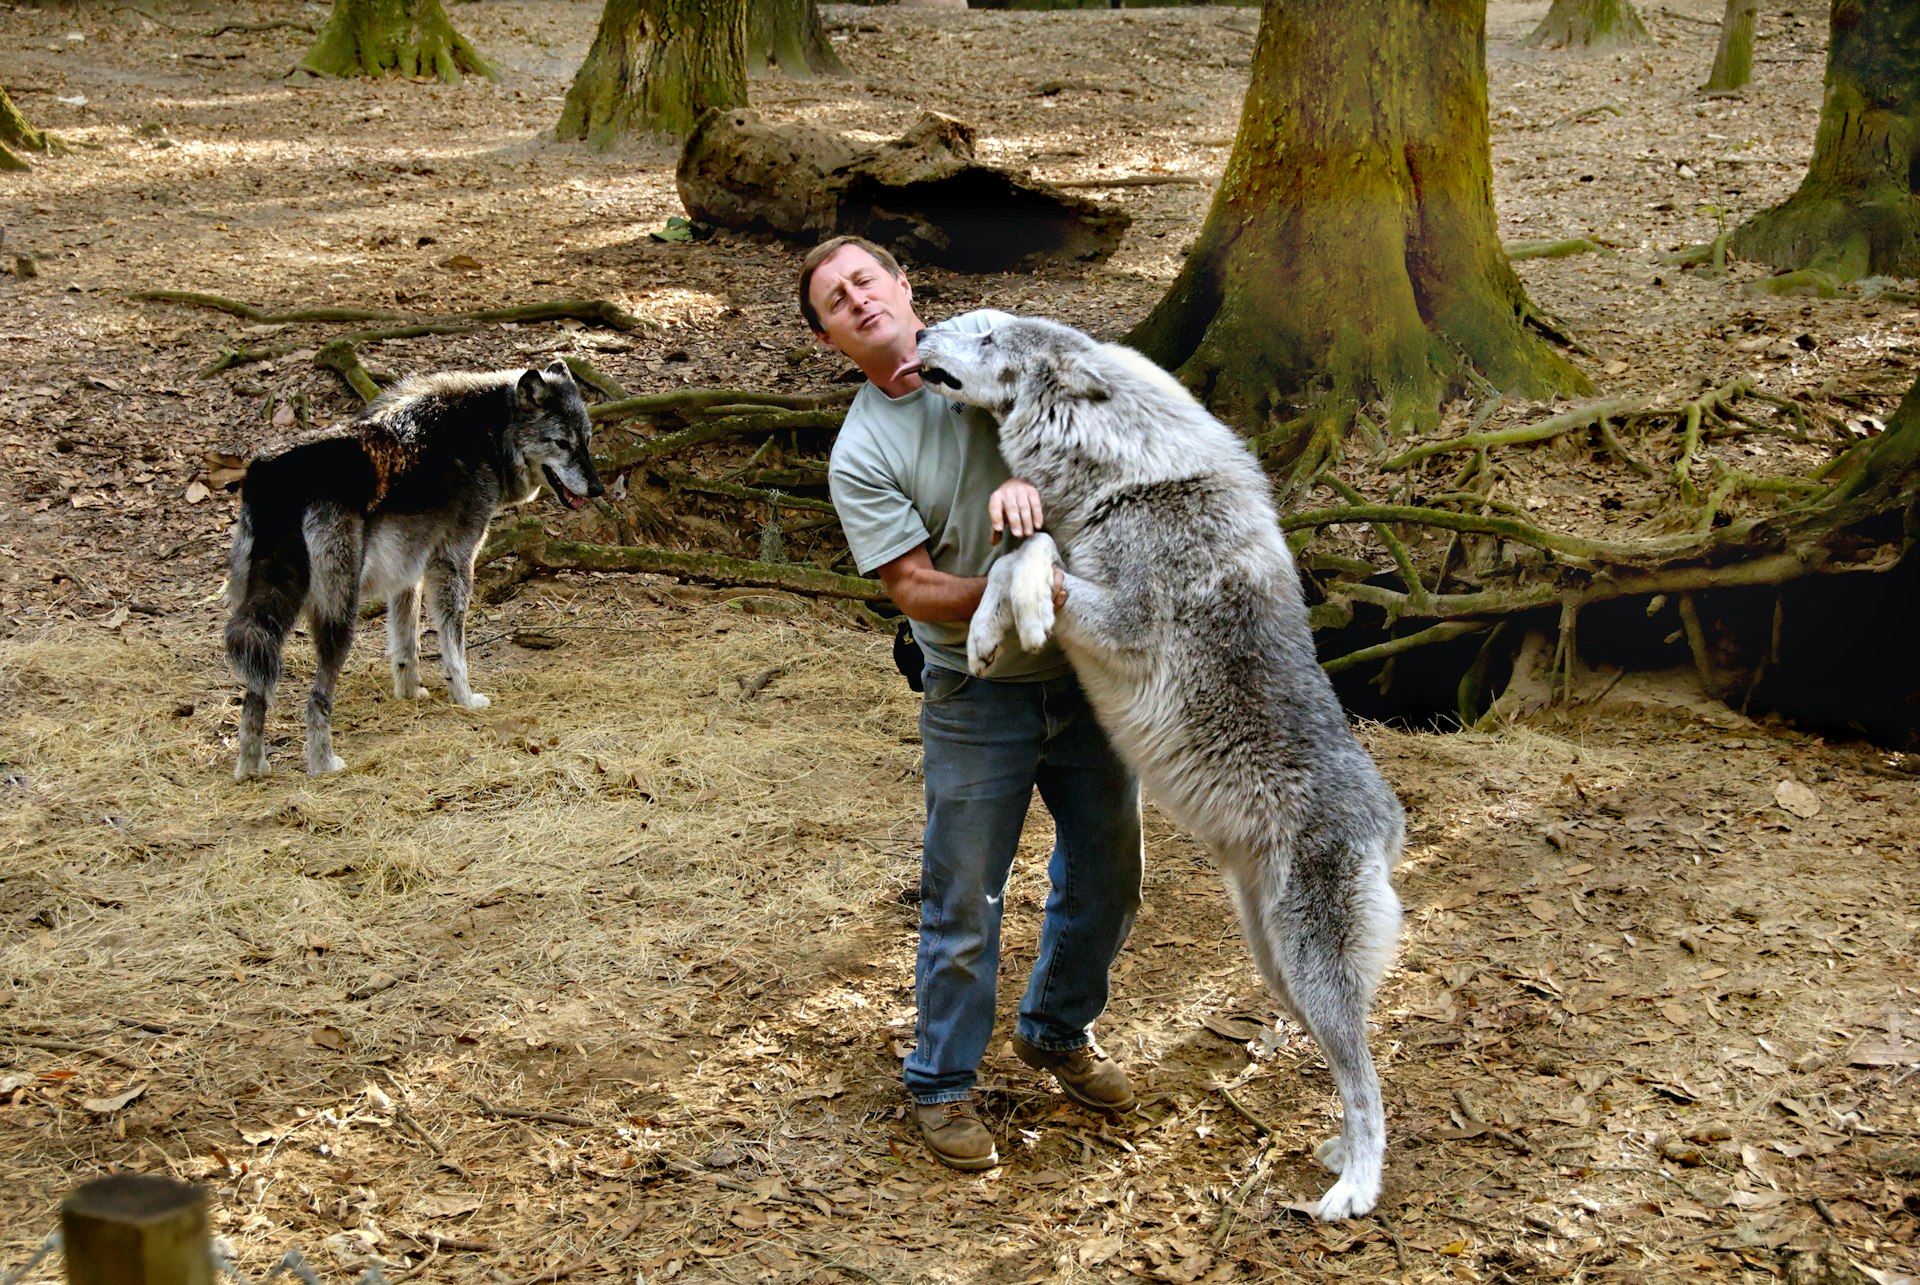 A gray wolf stands on its hindlegs next to a trainer in a wildlife park